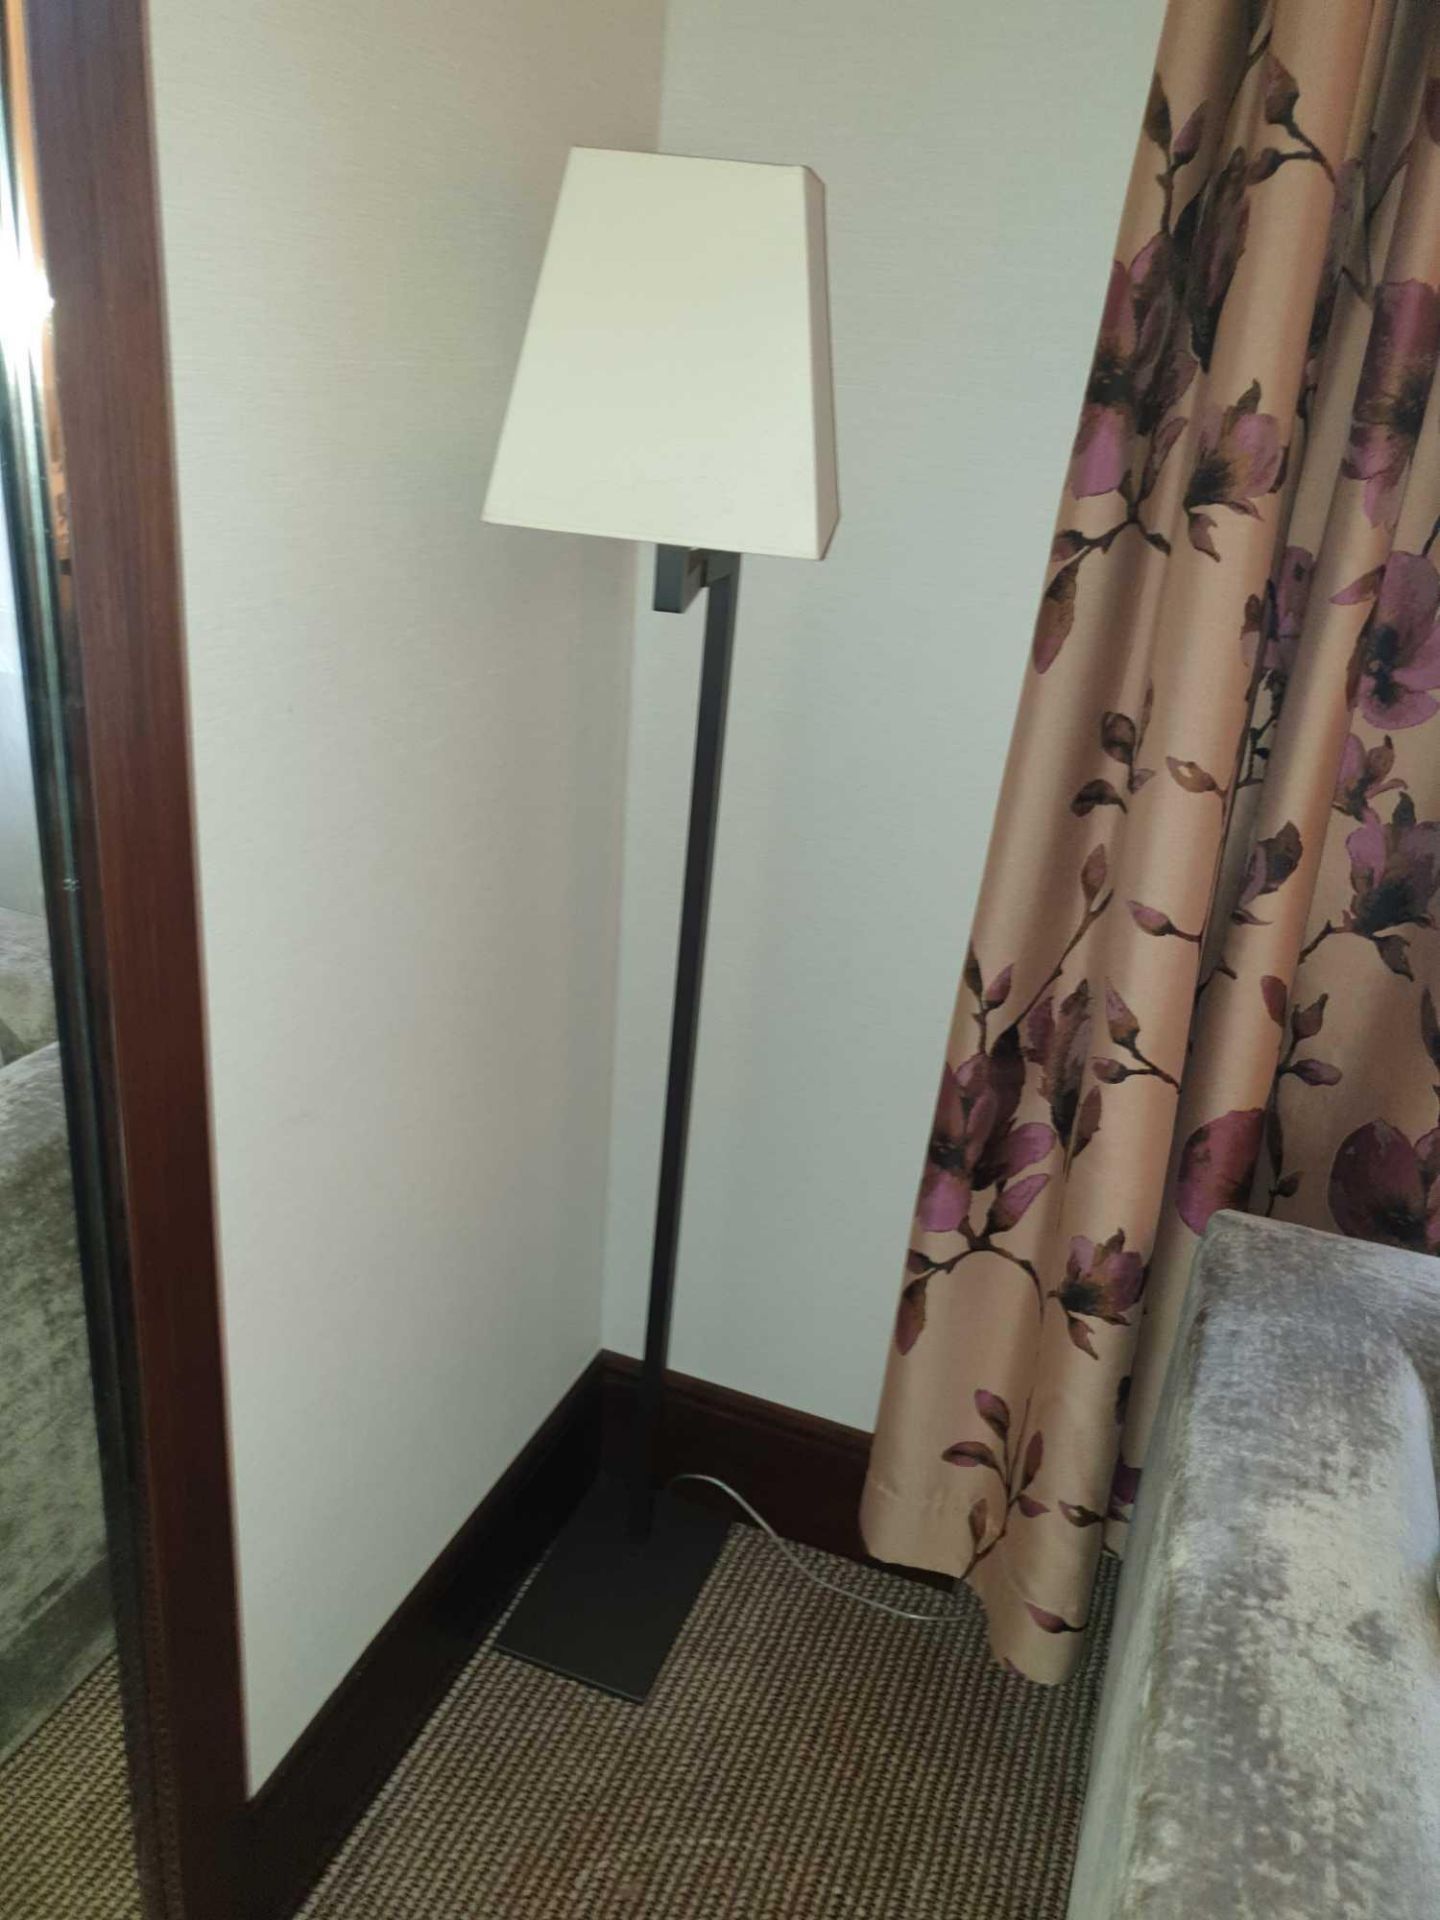 Sifra Floor Lamps Model LMS 600 ENG Metal Base With Single Arm Single Bulb Complete With Cream - Bild 2 aus 2